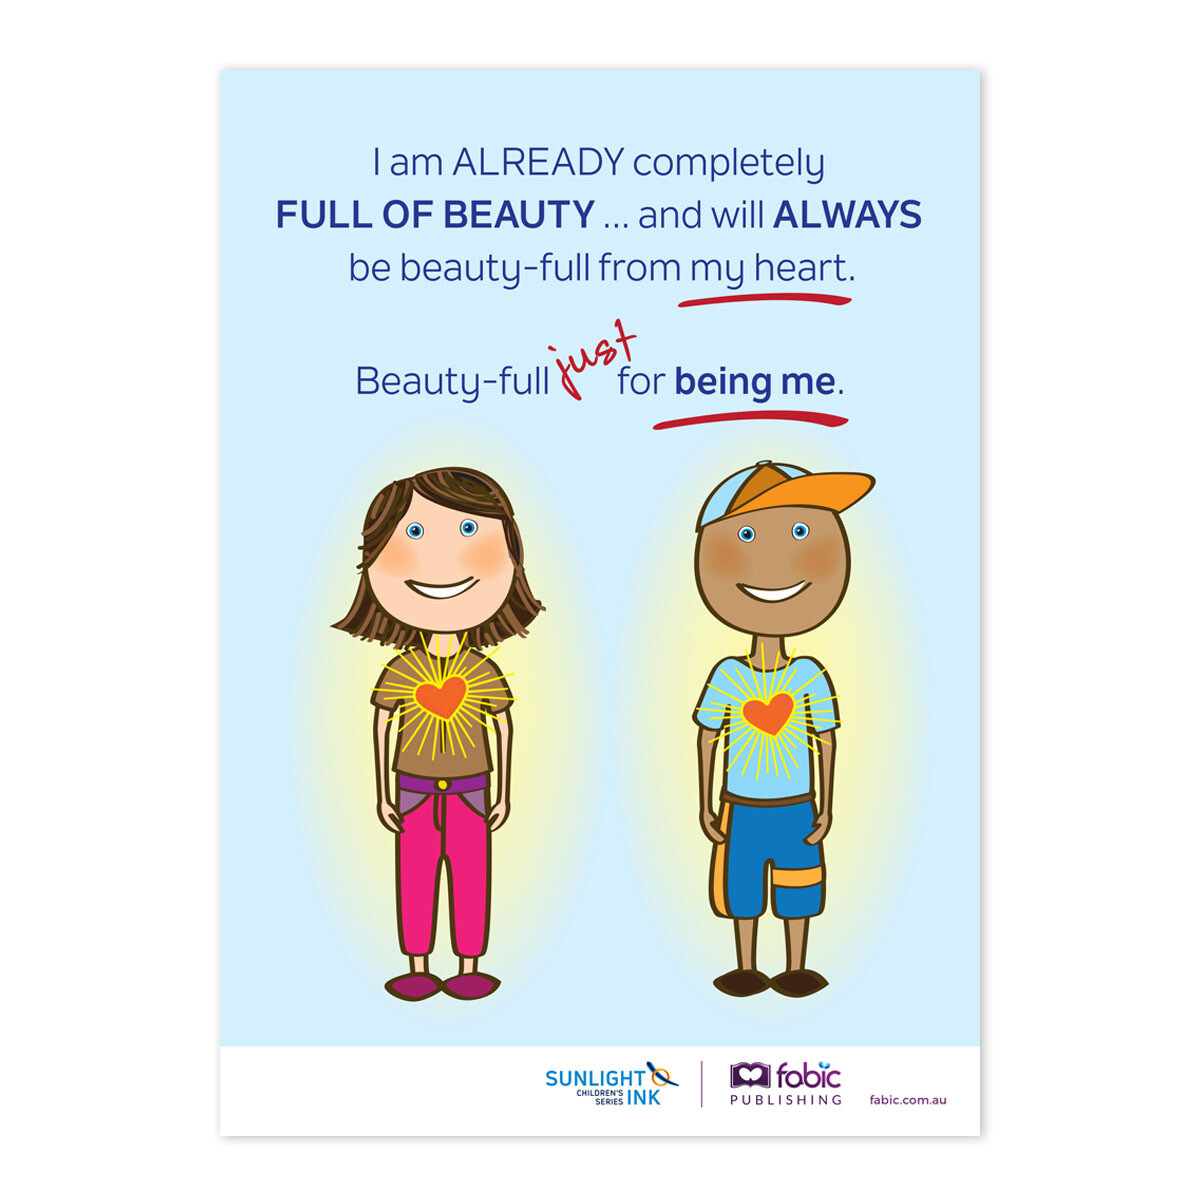 I am already completely full of beauty (Poster)